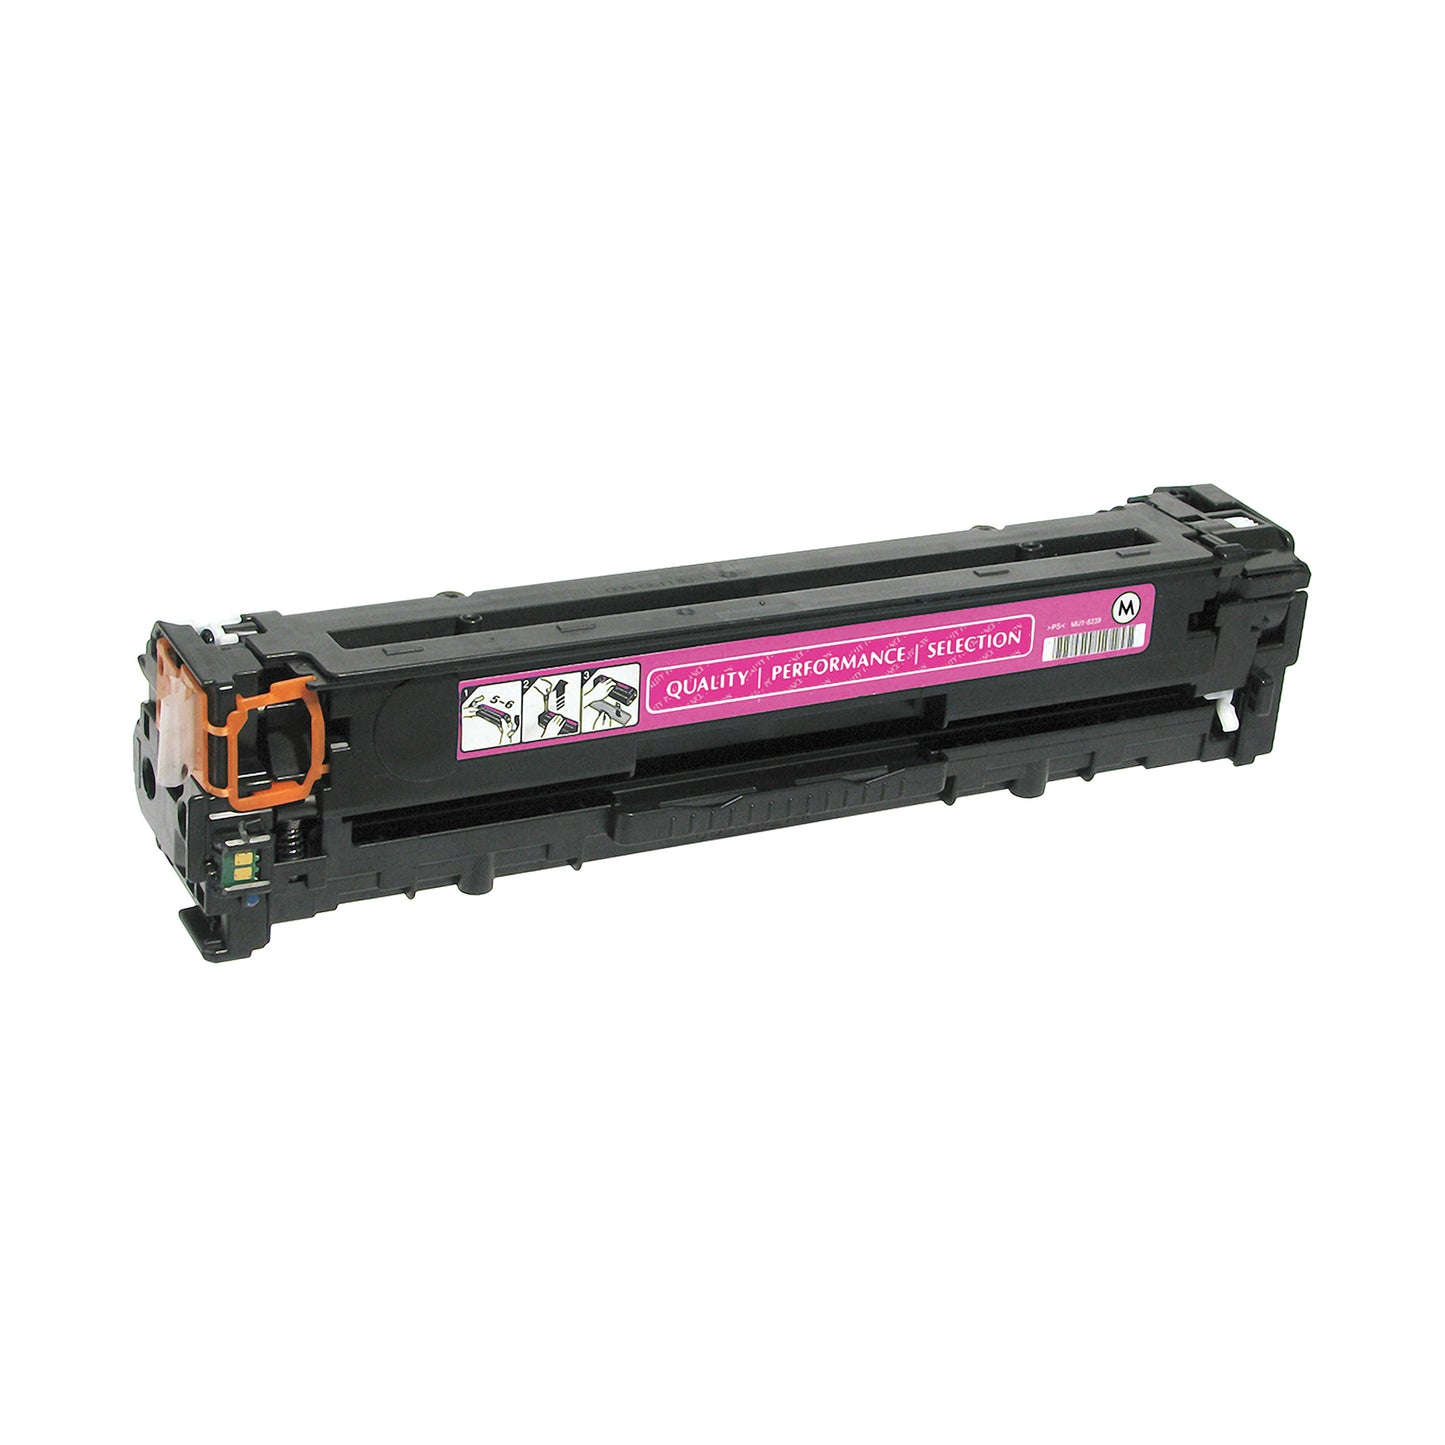 HP 125A (CB543A) Magenta Remanufactured Toner Cartridge [1,400 pages]